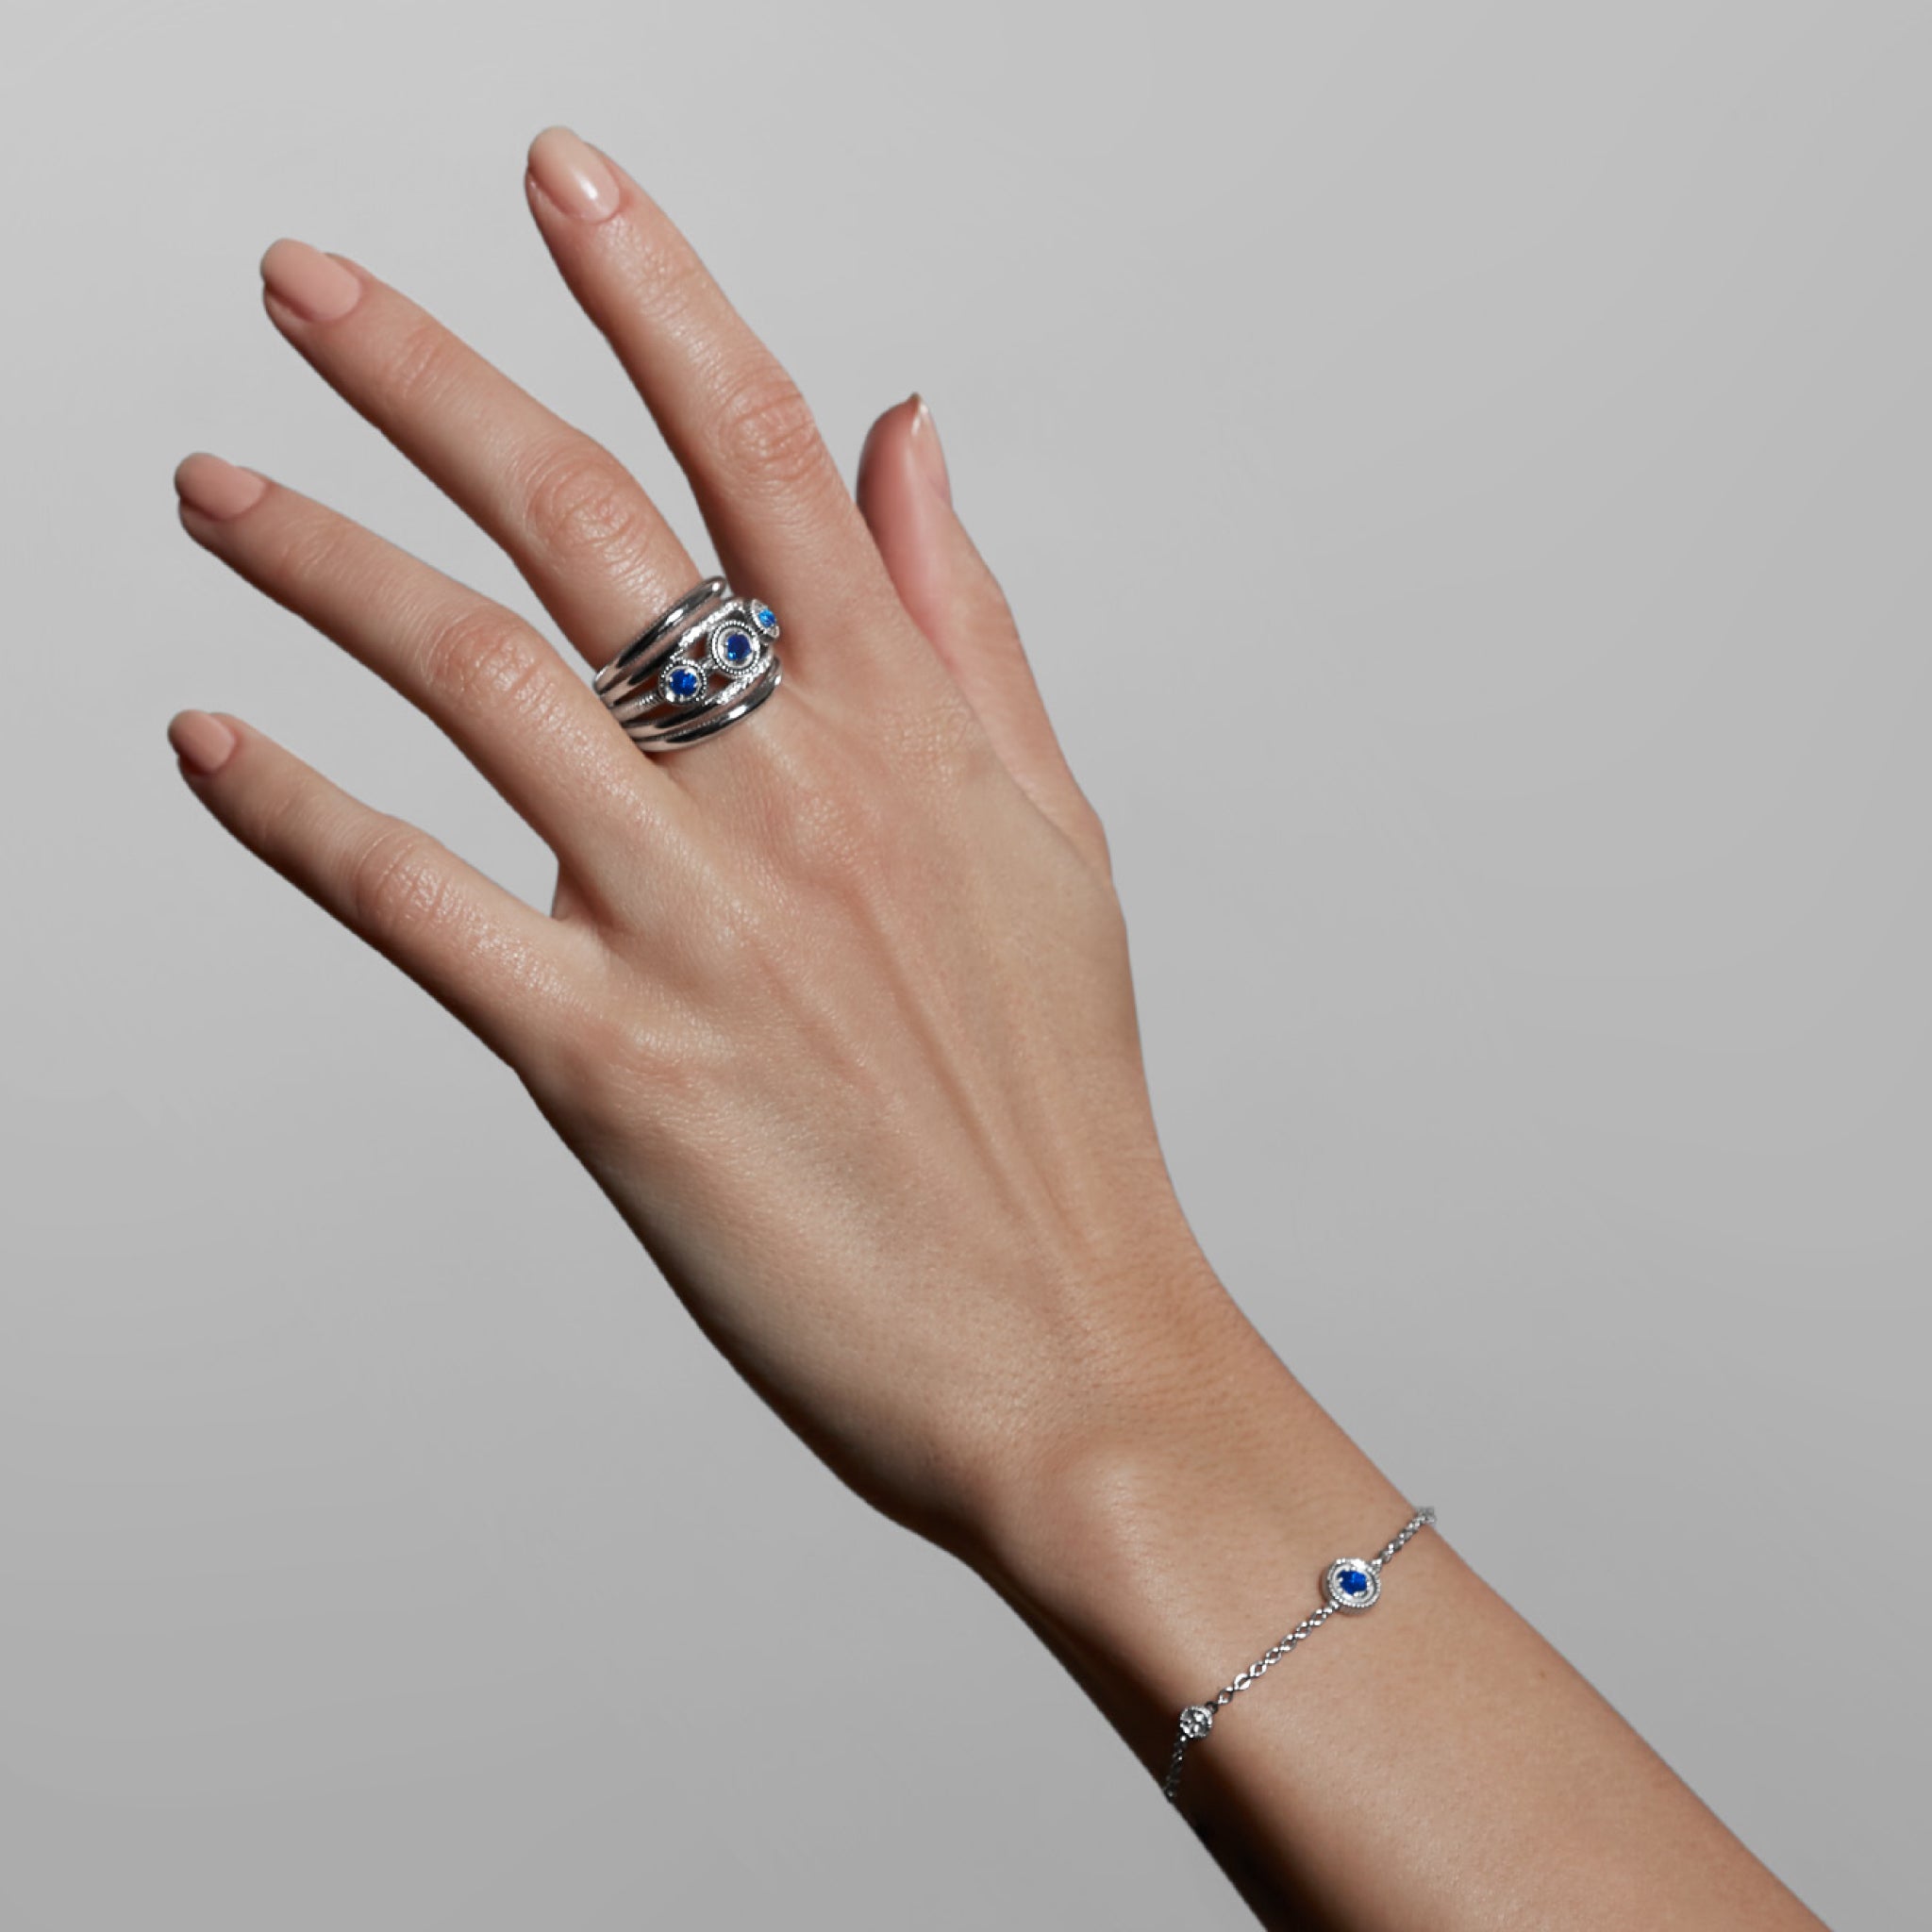 Max Band Ring with Blue Sapphire and Diamonds